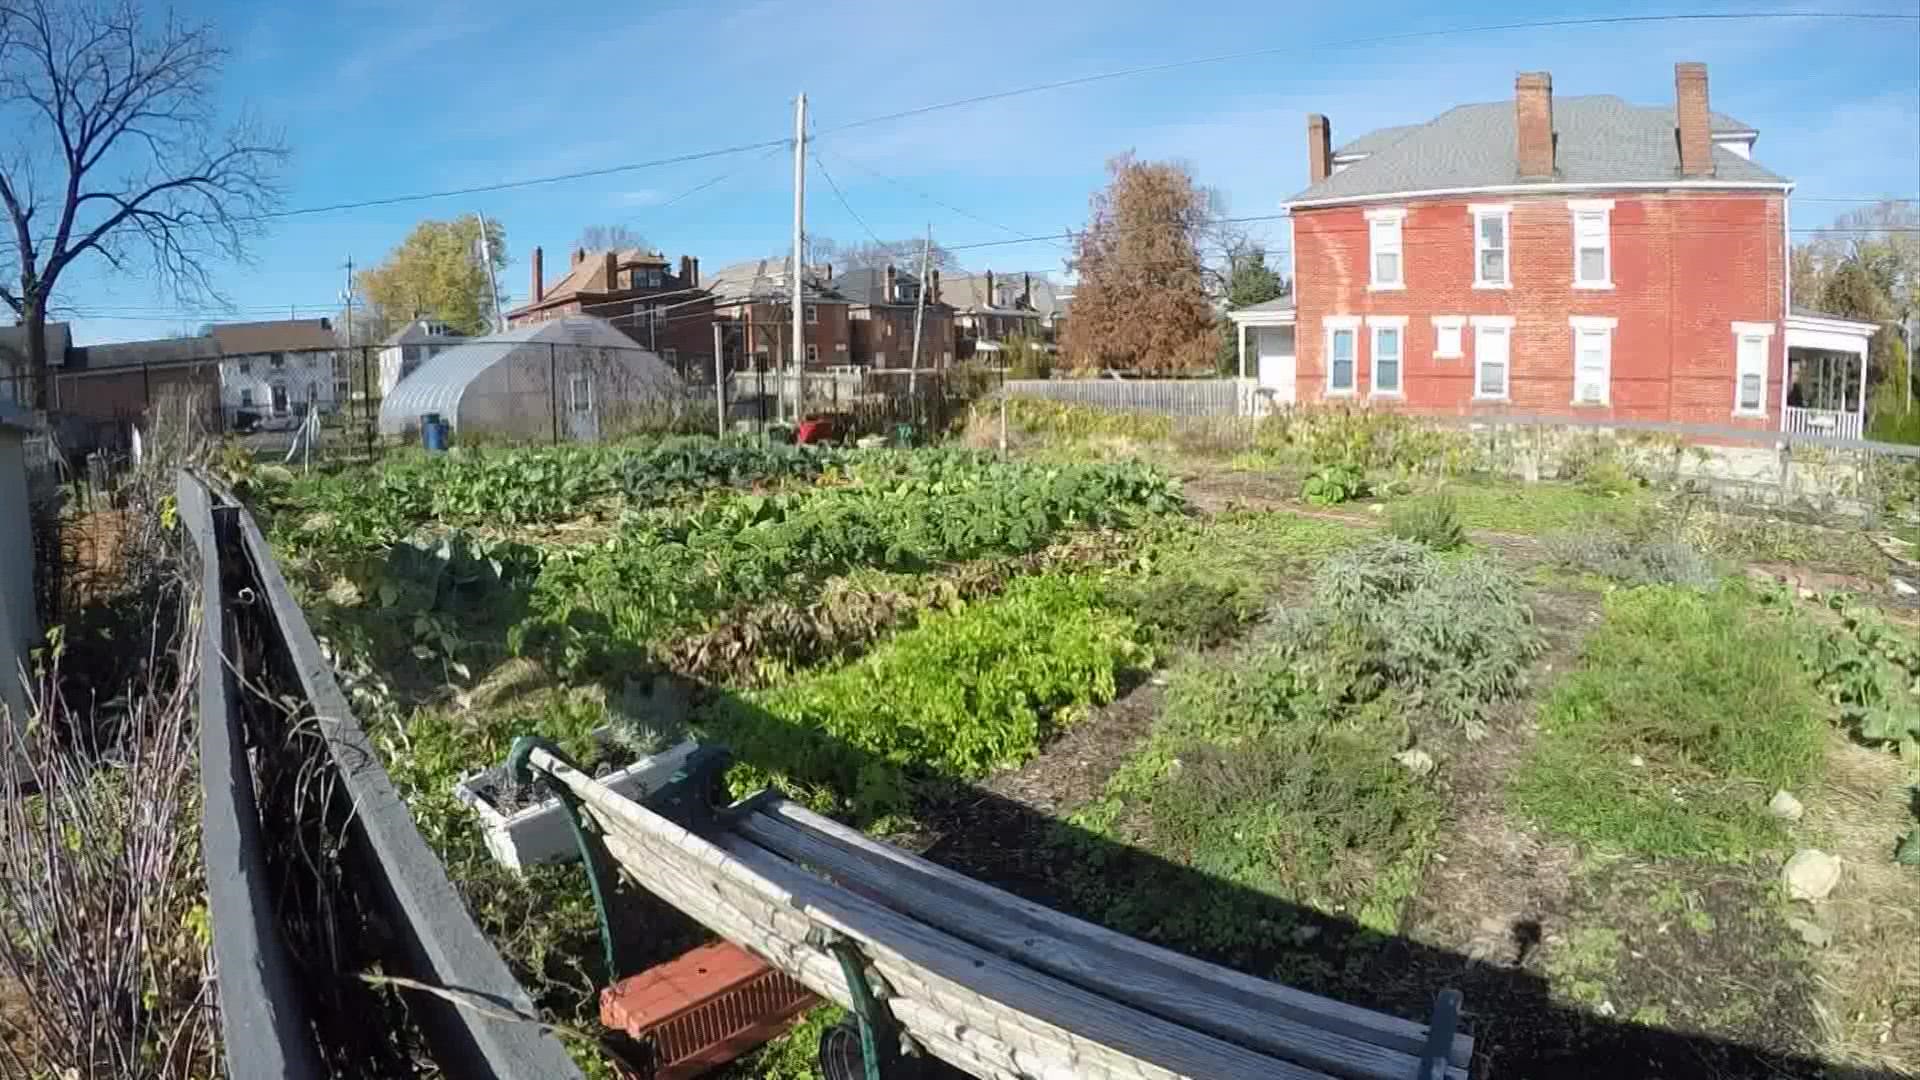 There are 16 community gardens currently on Columbus’ Near East and East side.